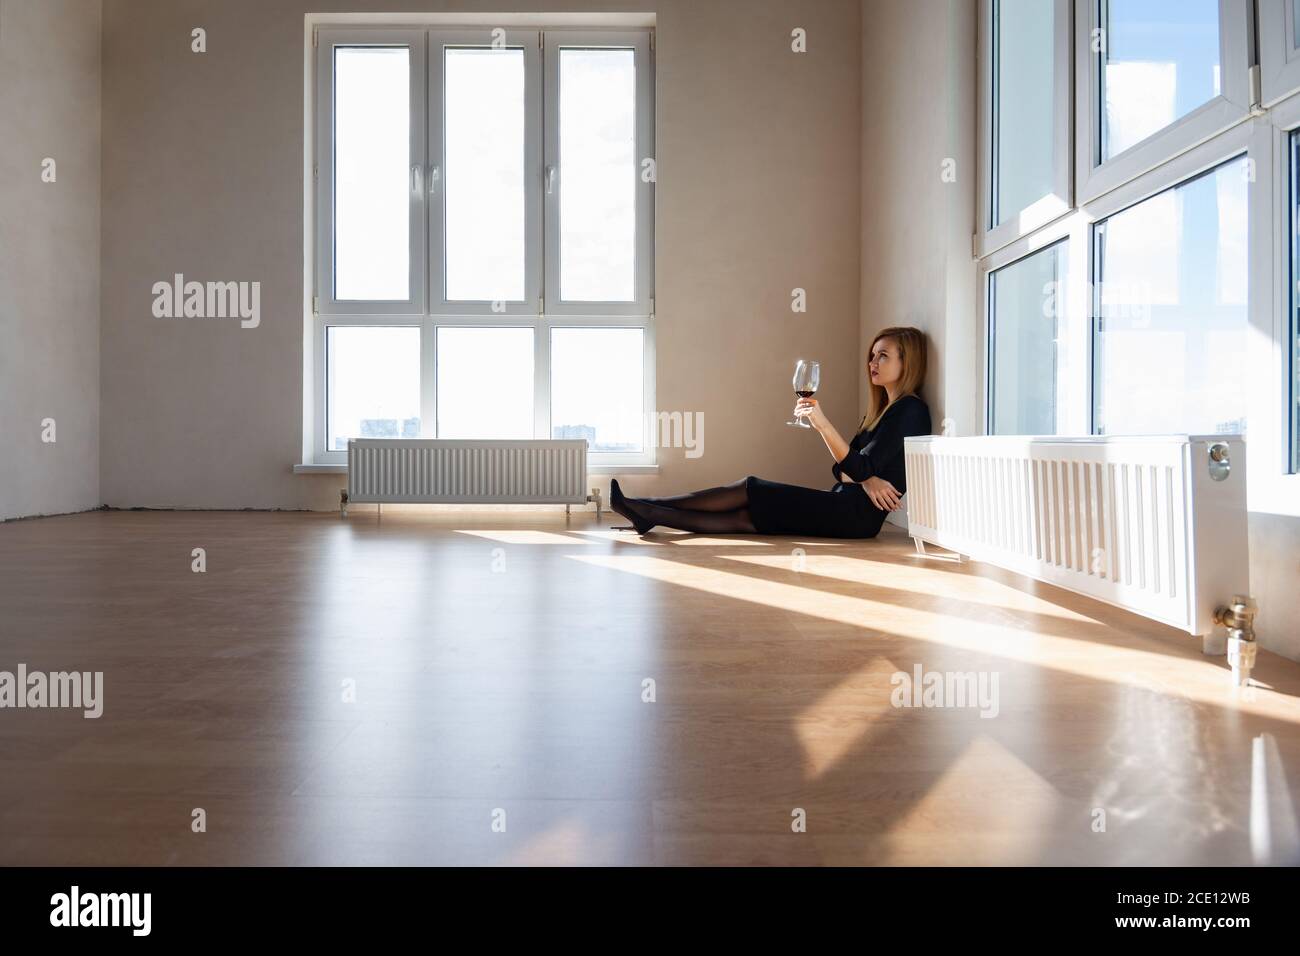 Beautiful elegant girl sits on the floor in a large light room with stained glass windows Stock Photo